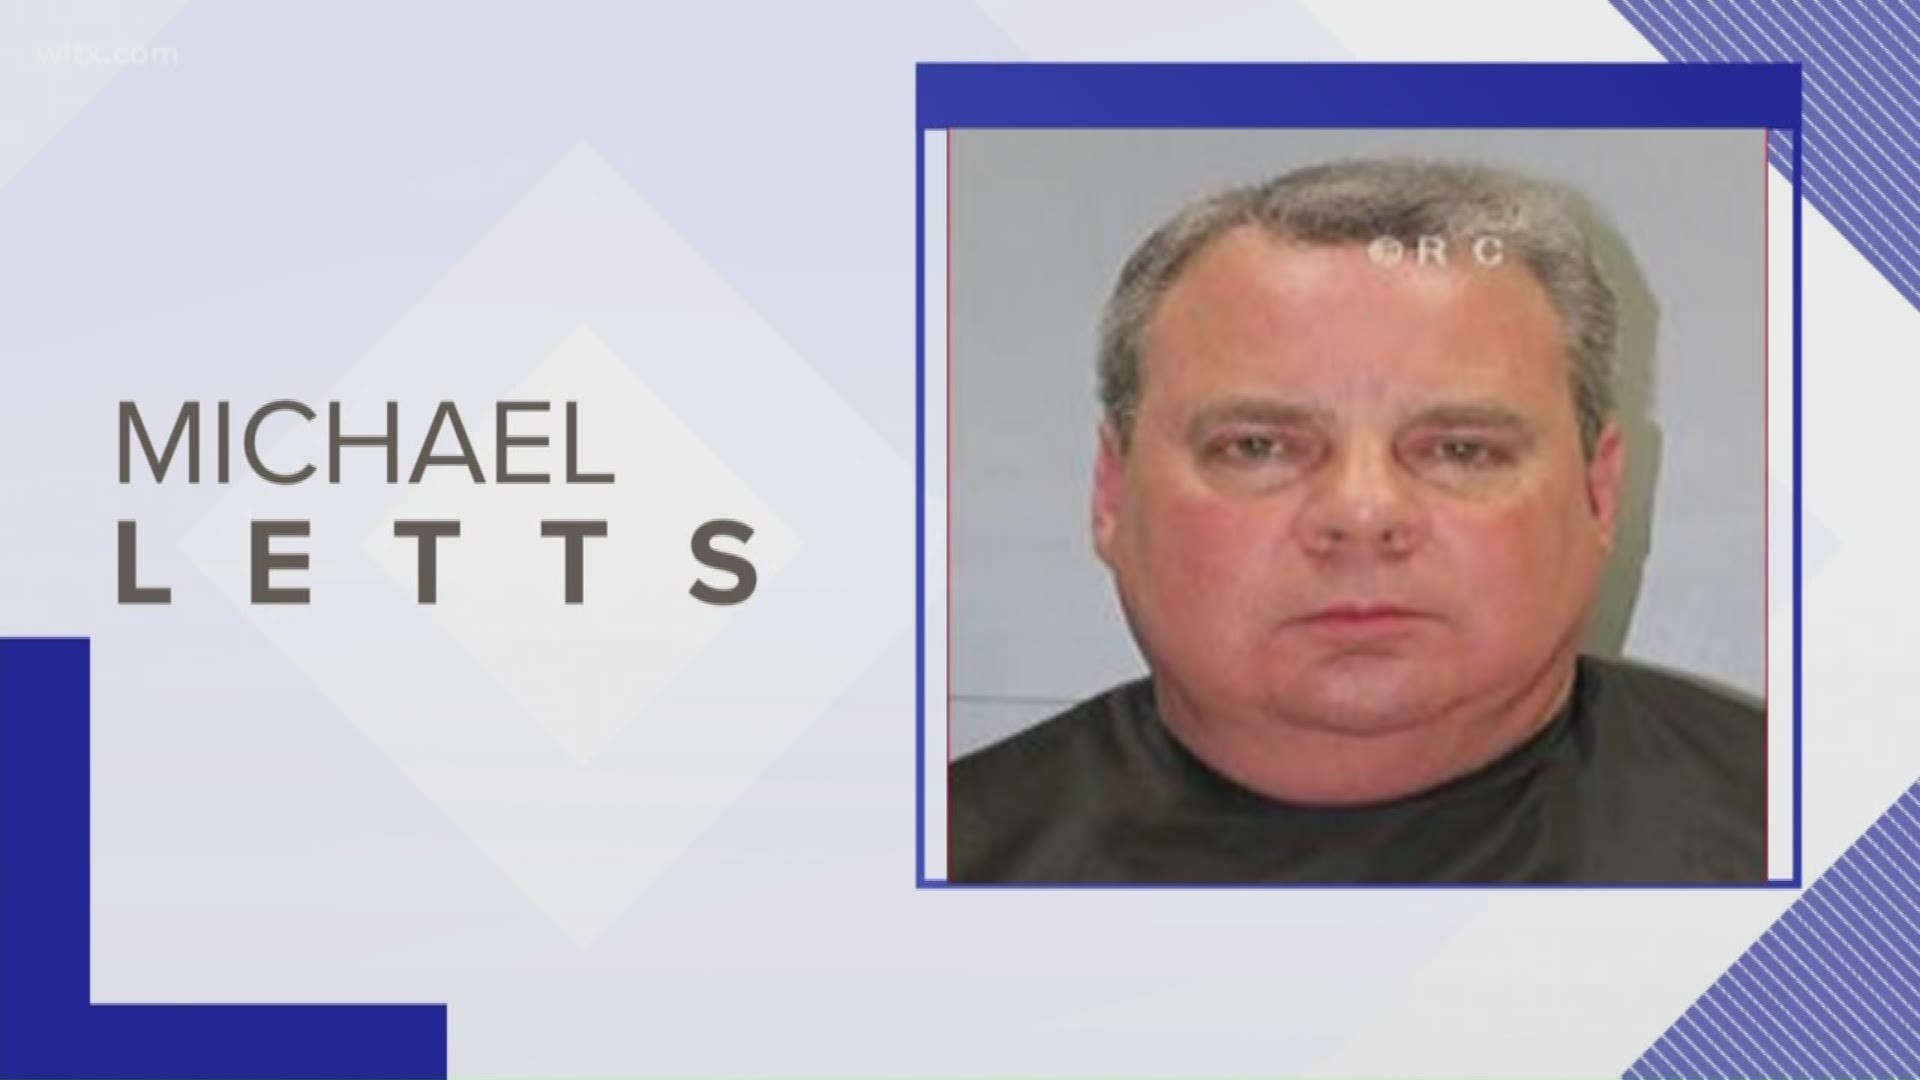 Michael Letts, 56, has been arrested for sexual crimes against a minor.